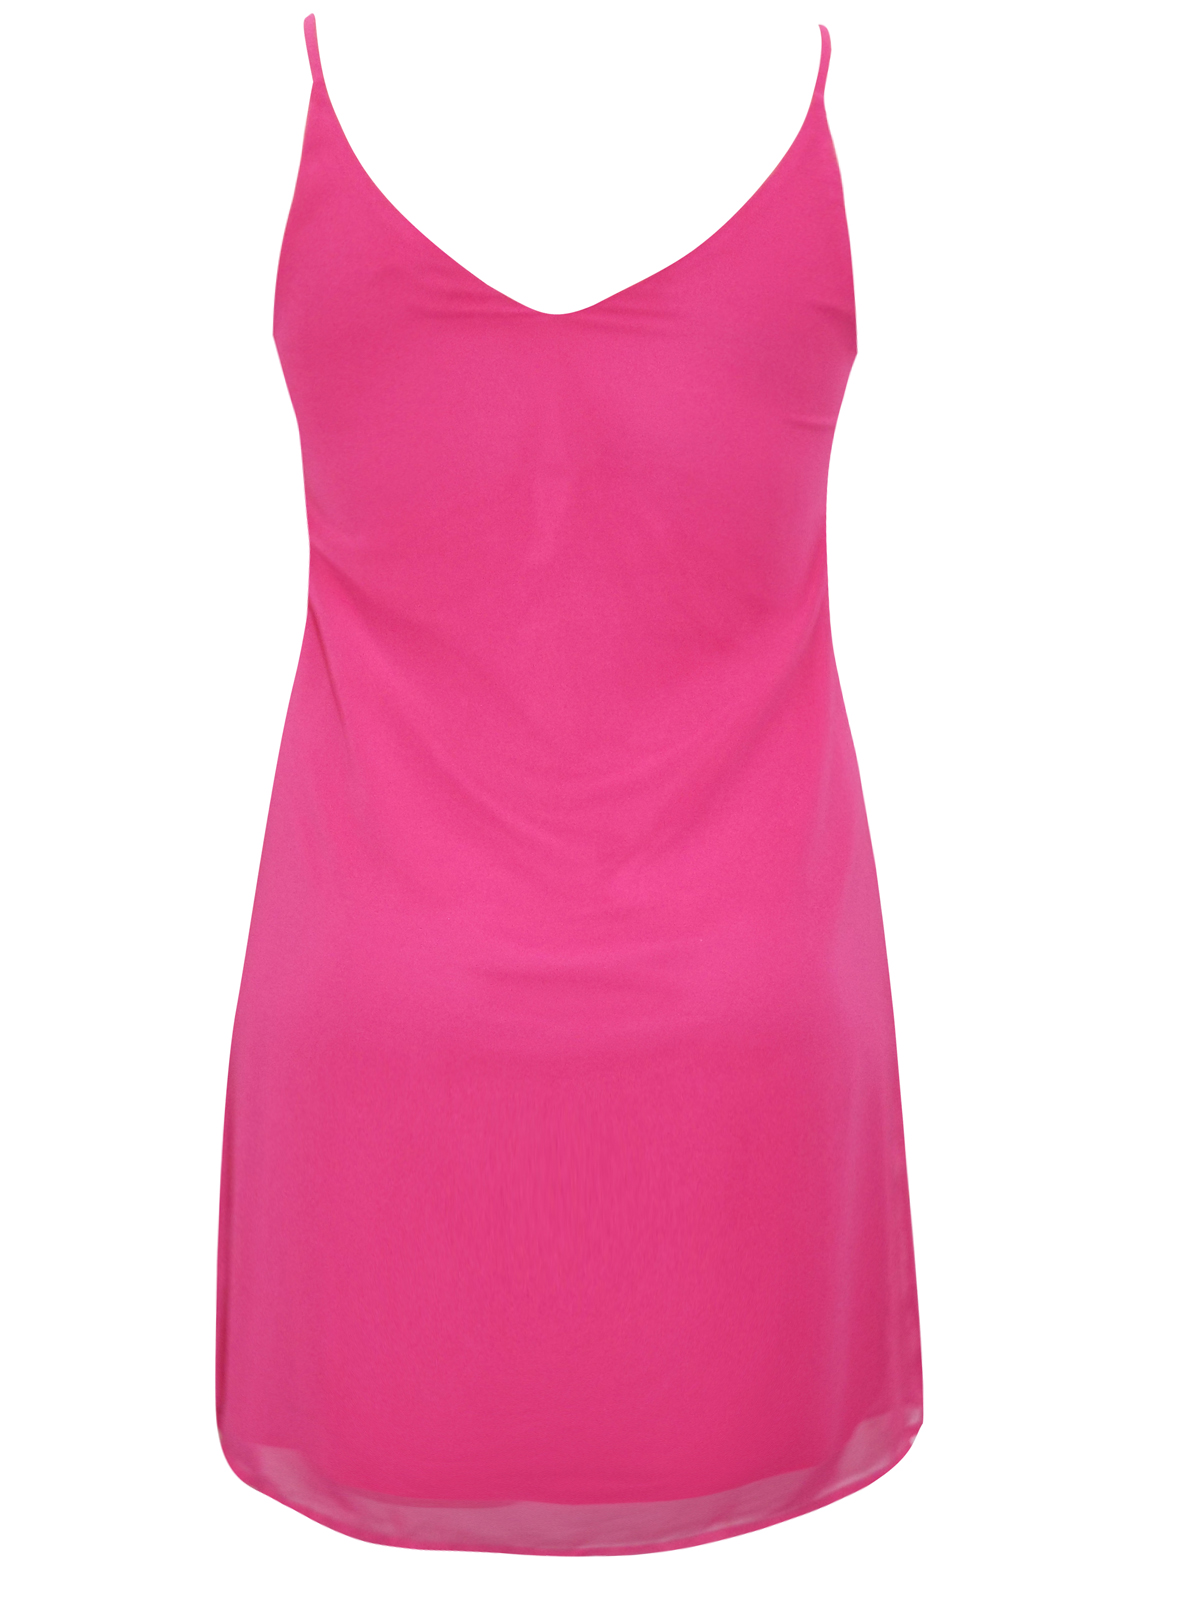 Plus Size wholesale clothing by simply be - - SimplyBe HOT-PINK Strappy ...